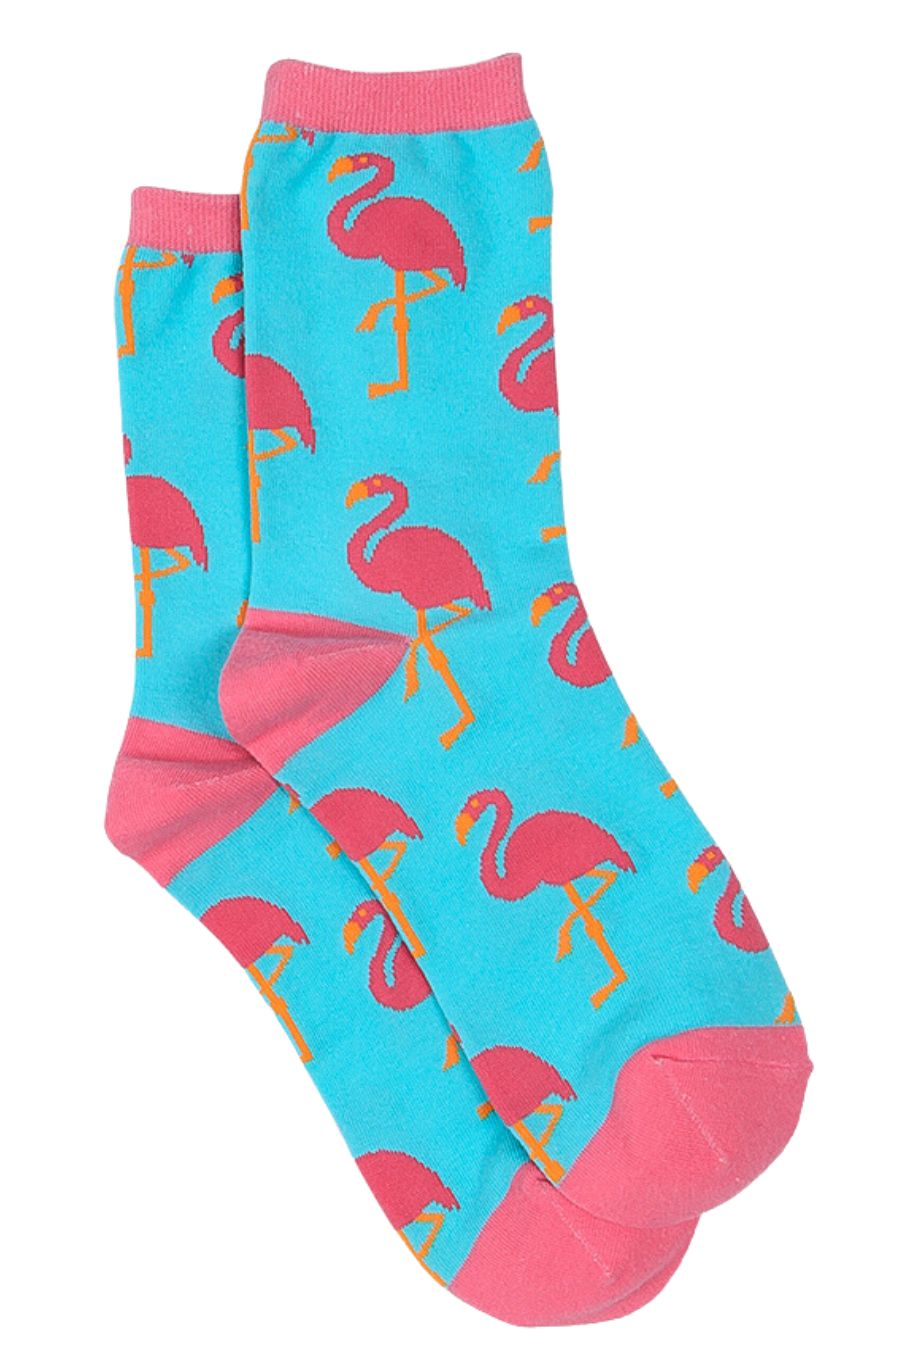 blue ankles socks with pink flamingo birds all over